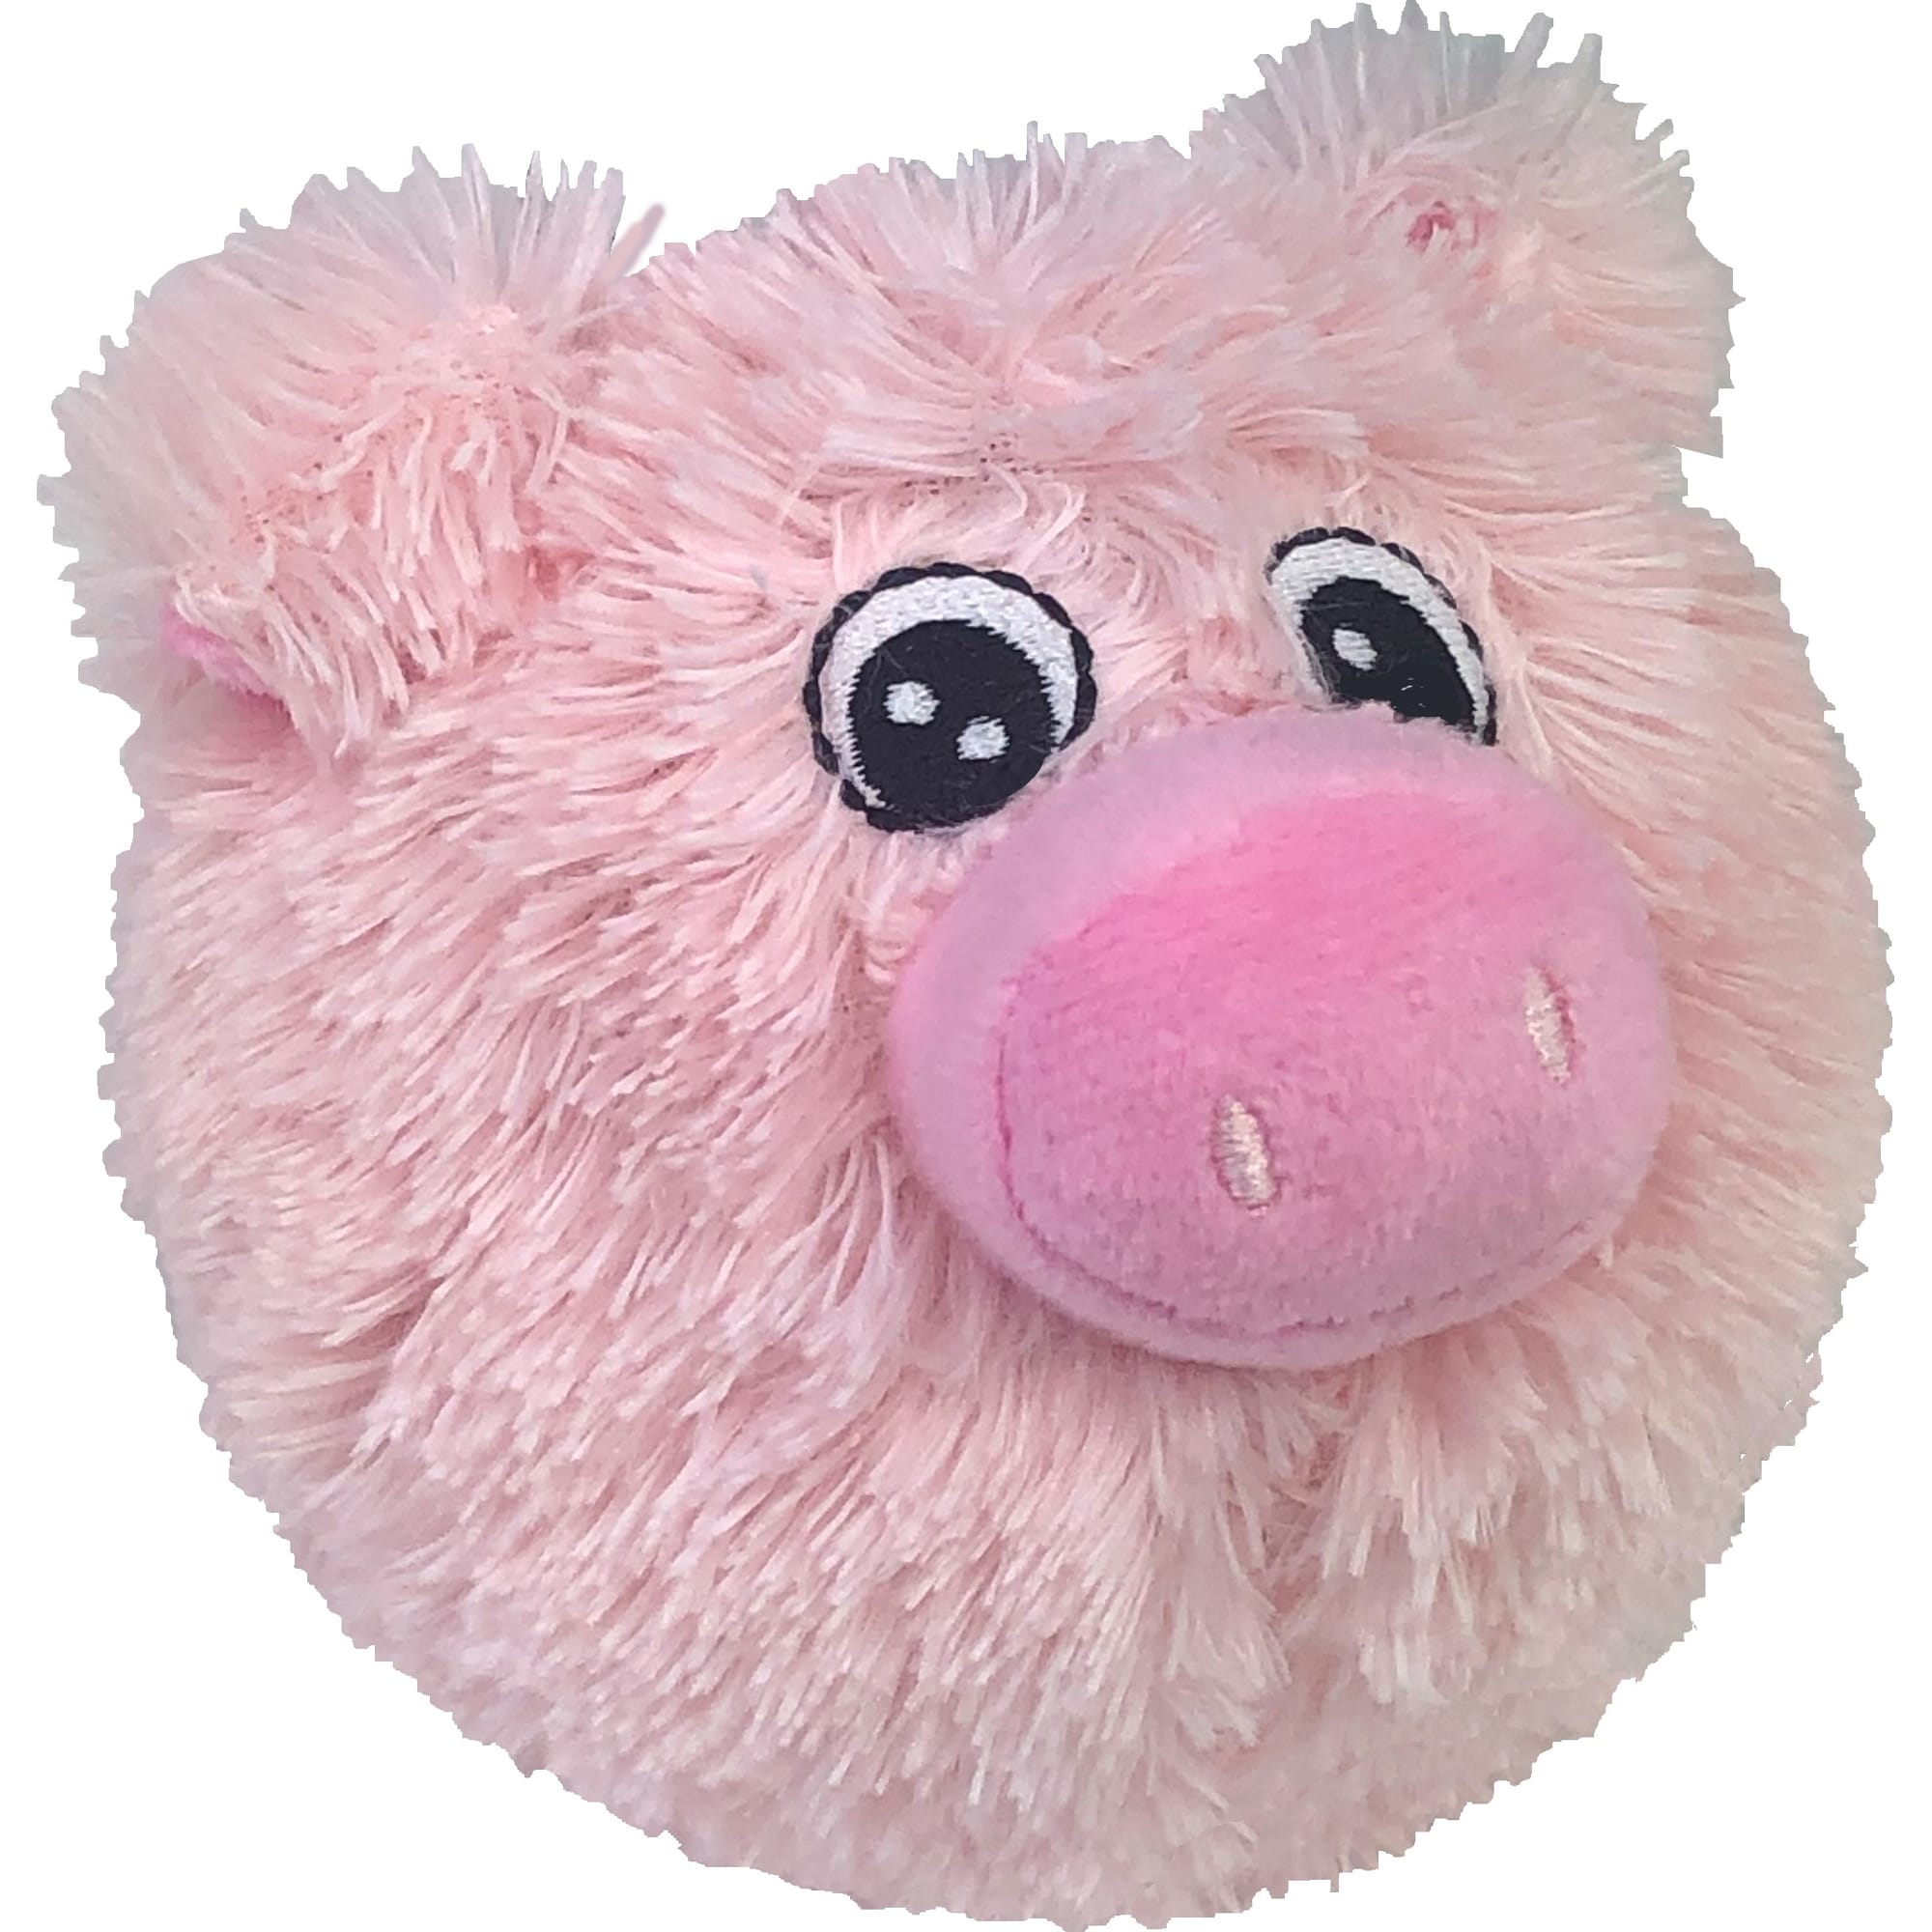 squealing pig toy